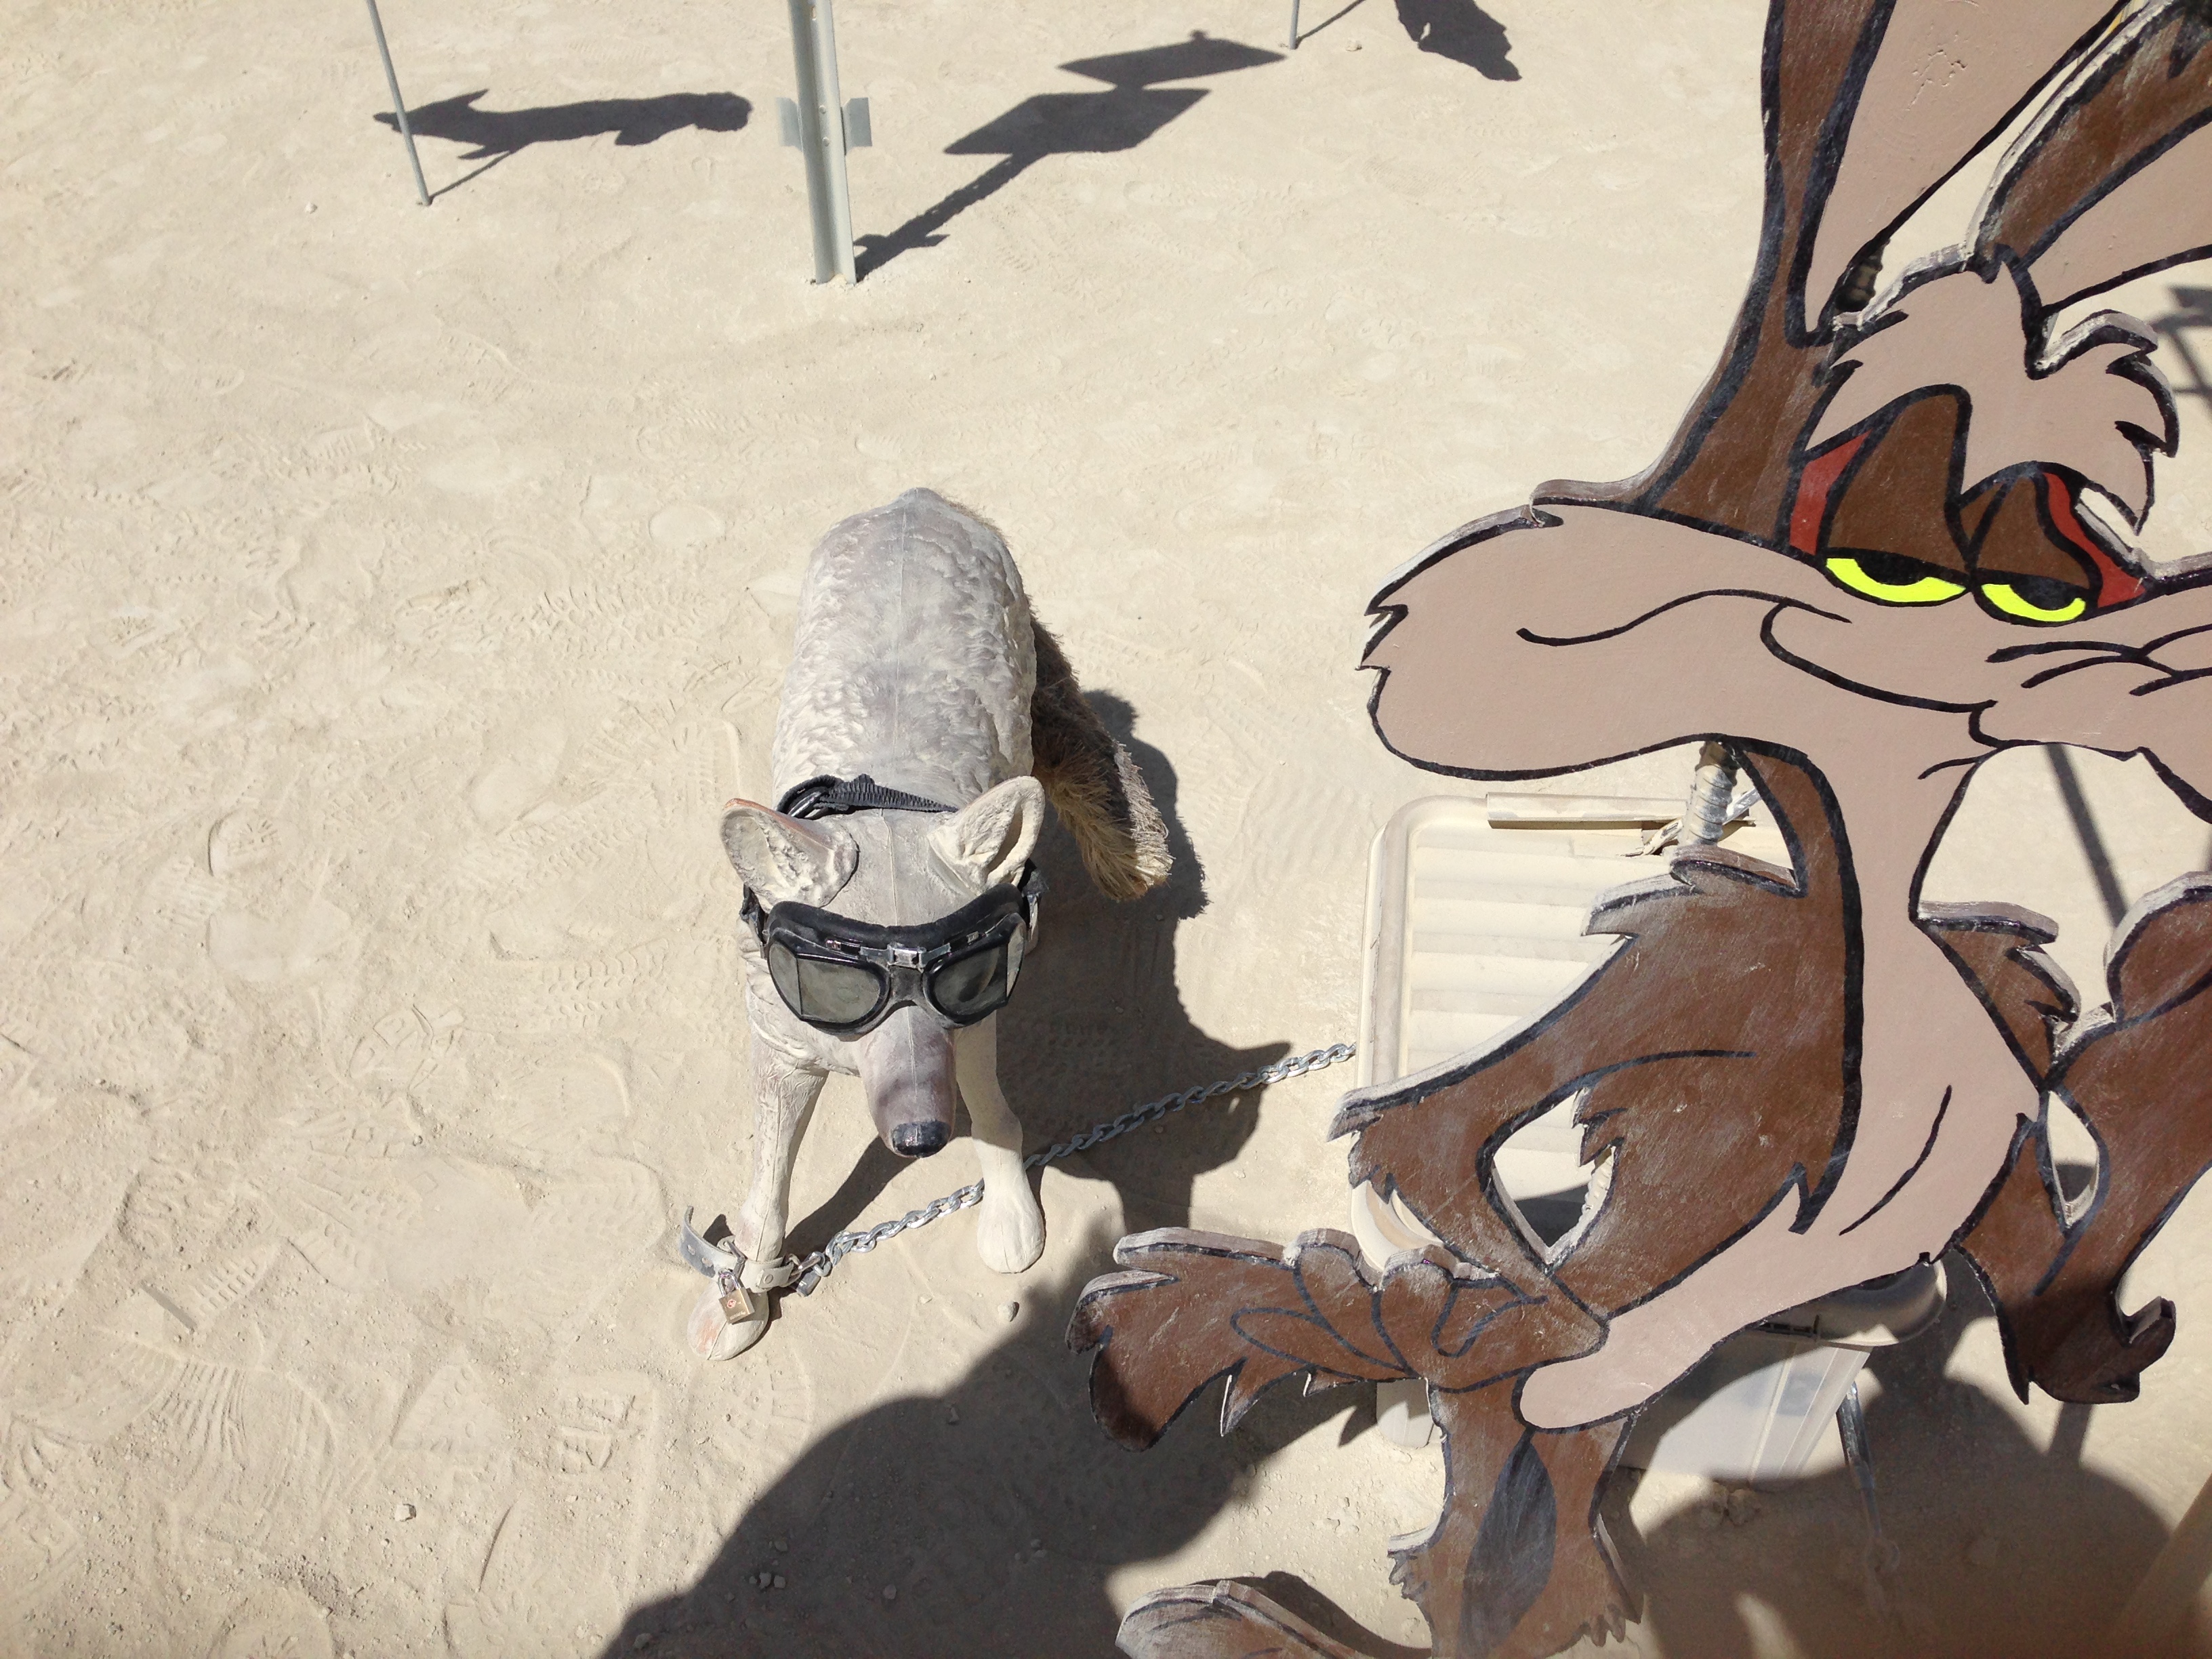 *All* cool coyotes wear shades.